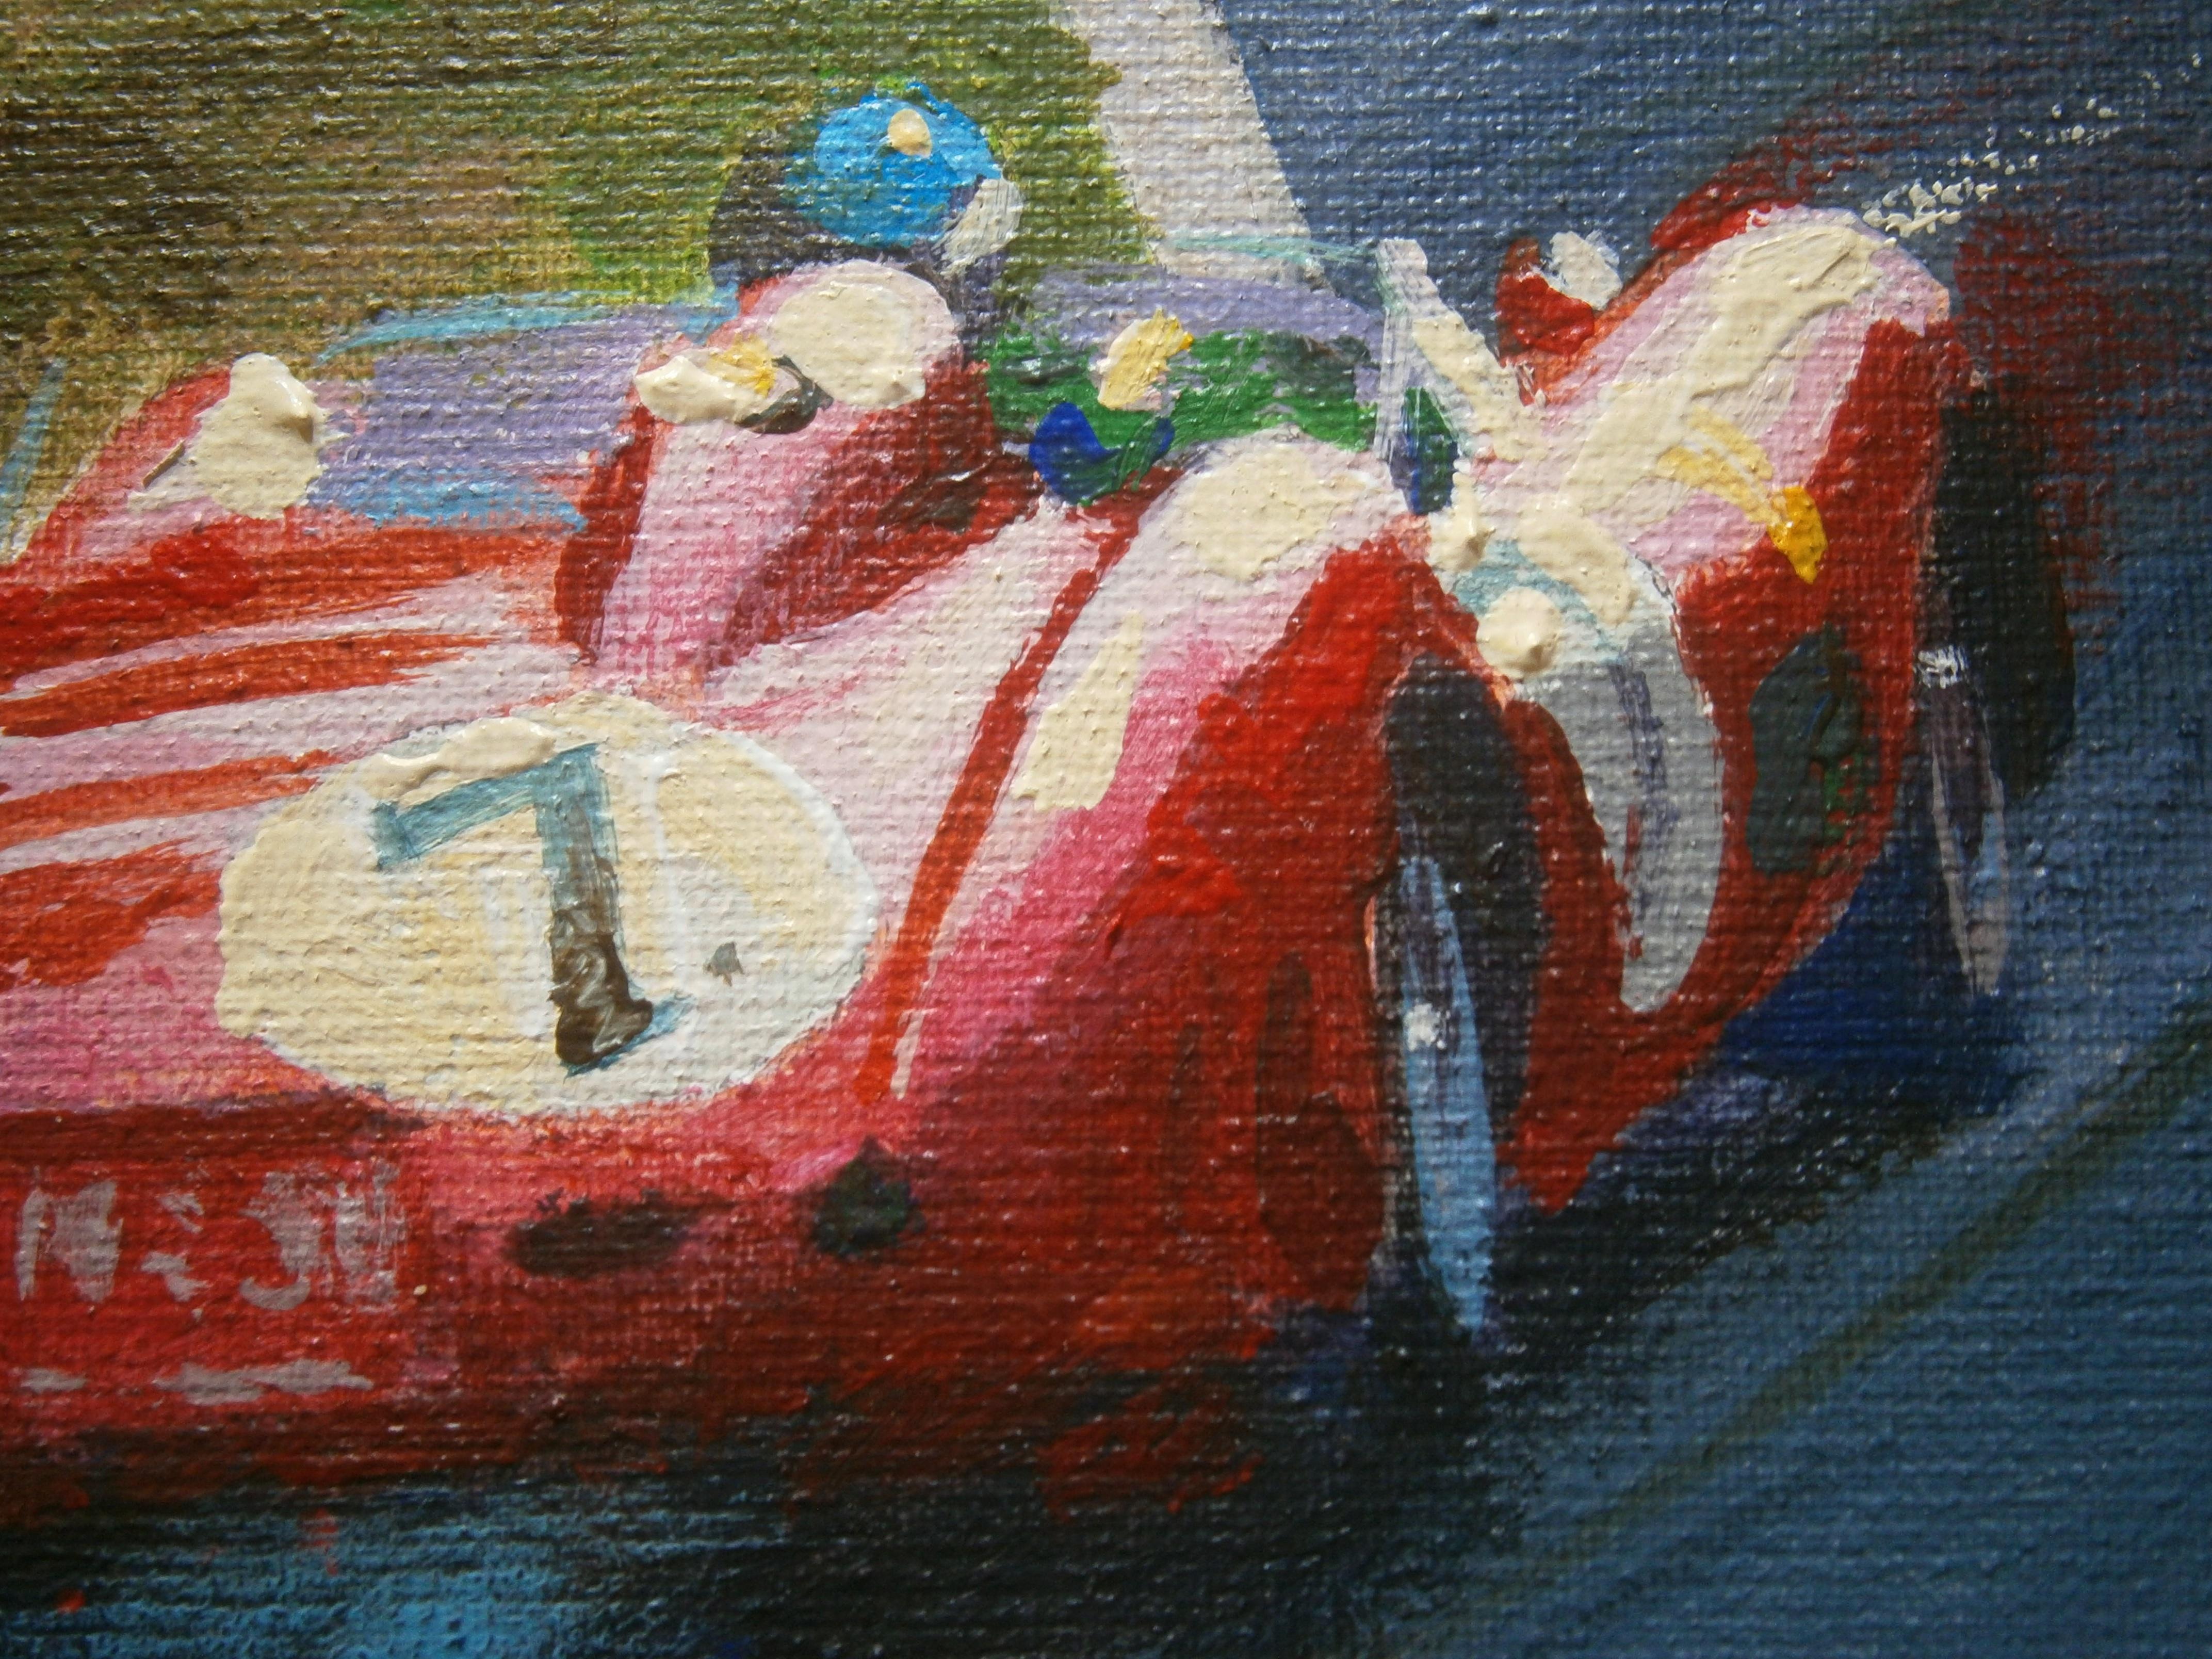 Alex Balaguer
BALAGUER , Alex ( Barcelona 1968 )
During early childhood, Àlex Balaguer began to sketch motorcars symbolic of Maranello’s trademark vehicle.
Self-taught in the art world, Balaguer decided to unite his big love of motoring and